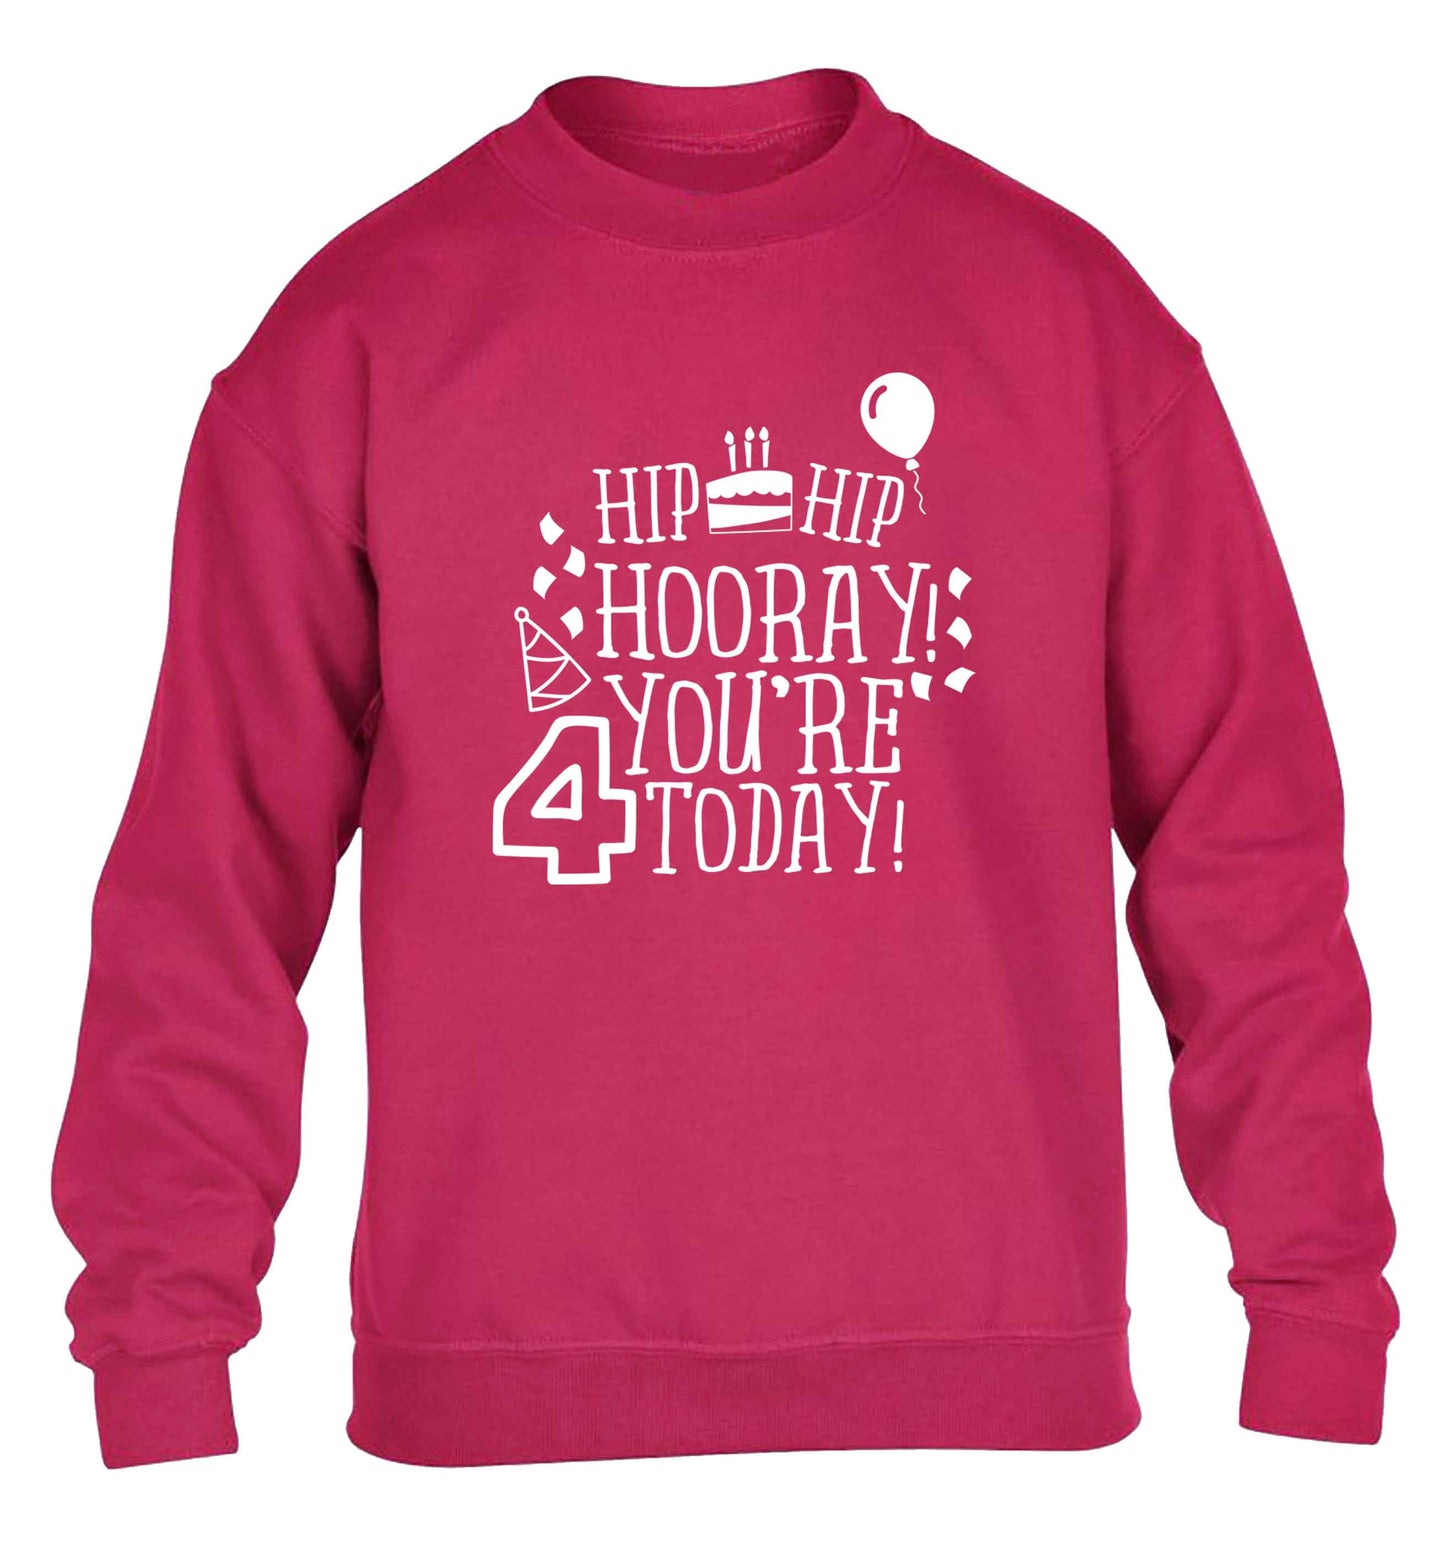 Hip hip hooray you're four today!children's pink sweater 12-13 Years